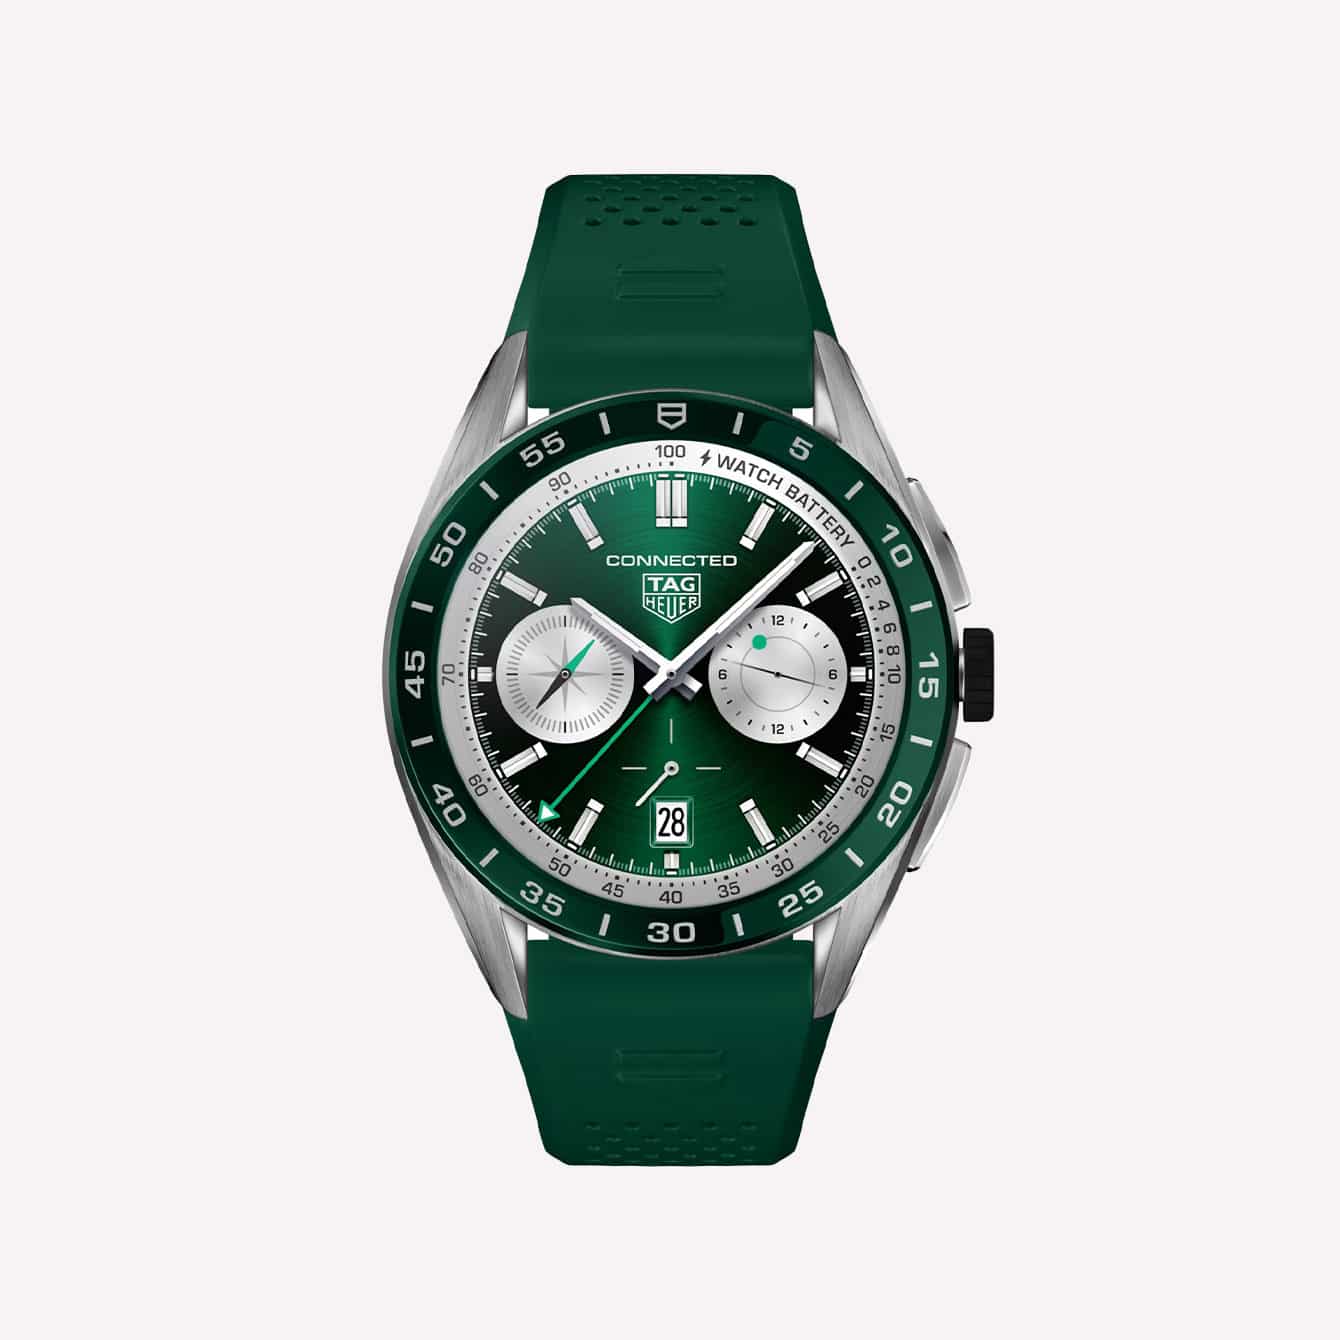 The New Green TAG Heuer Watches Unwrapped-7